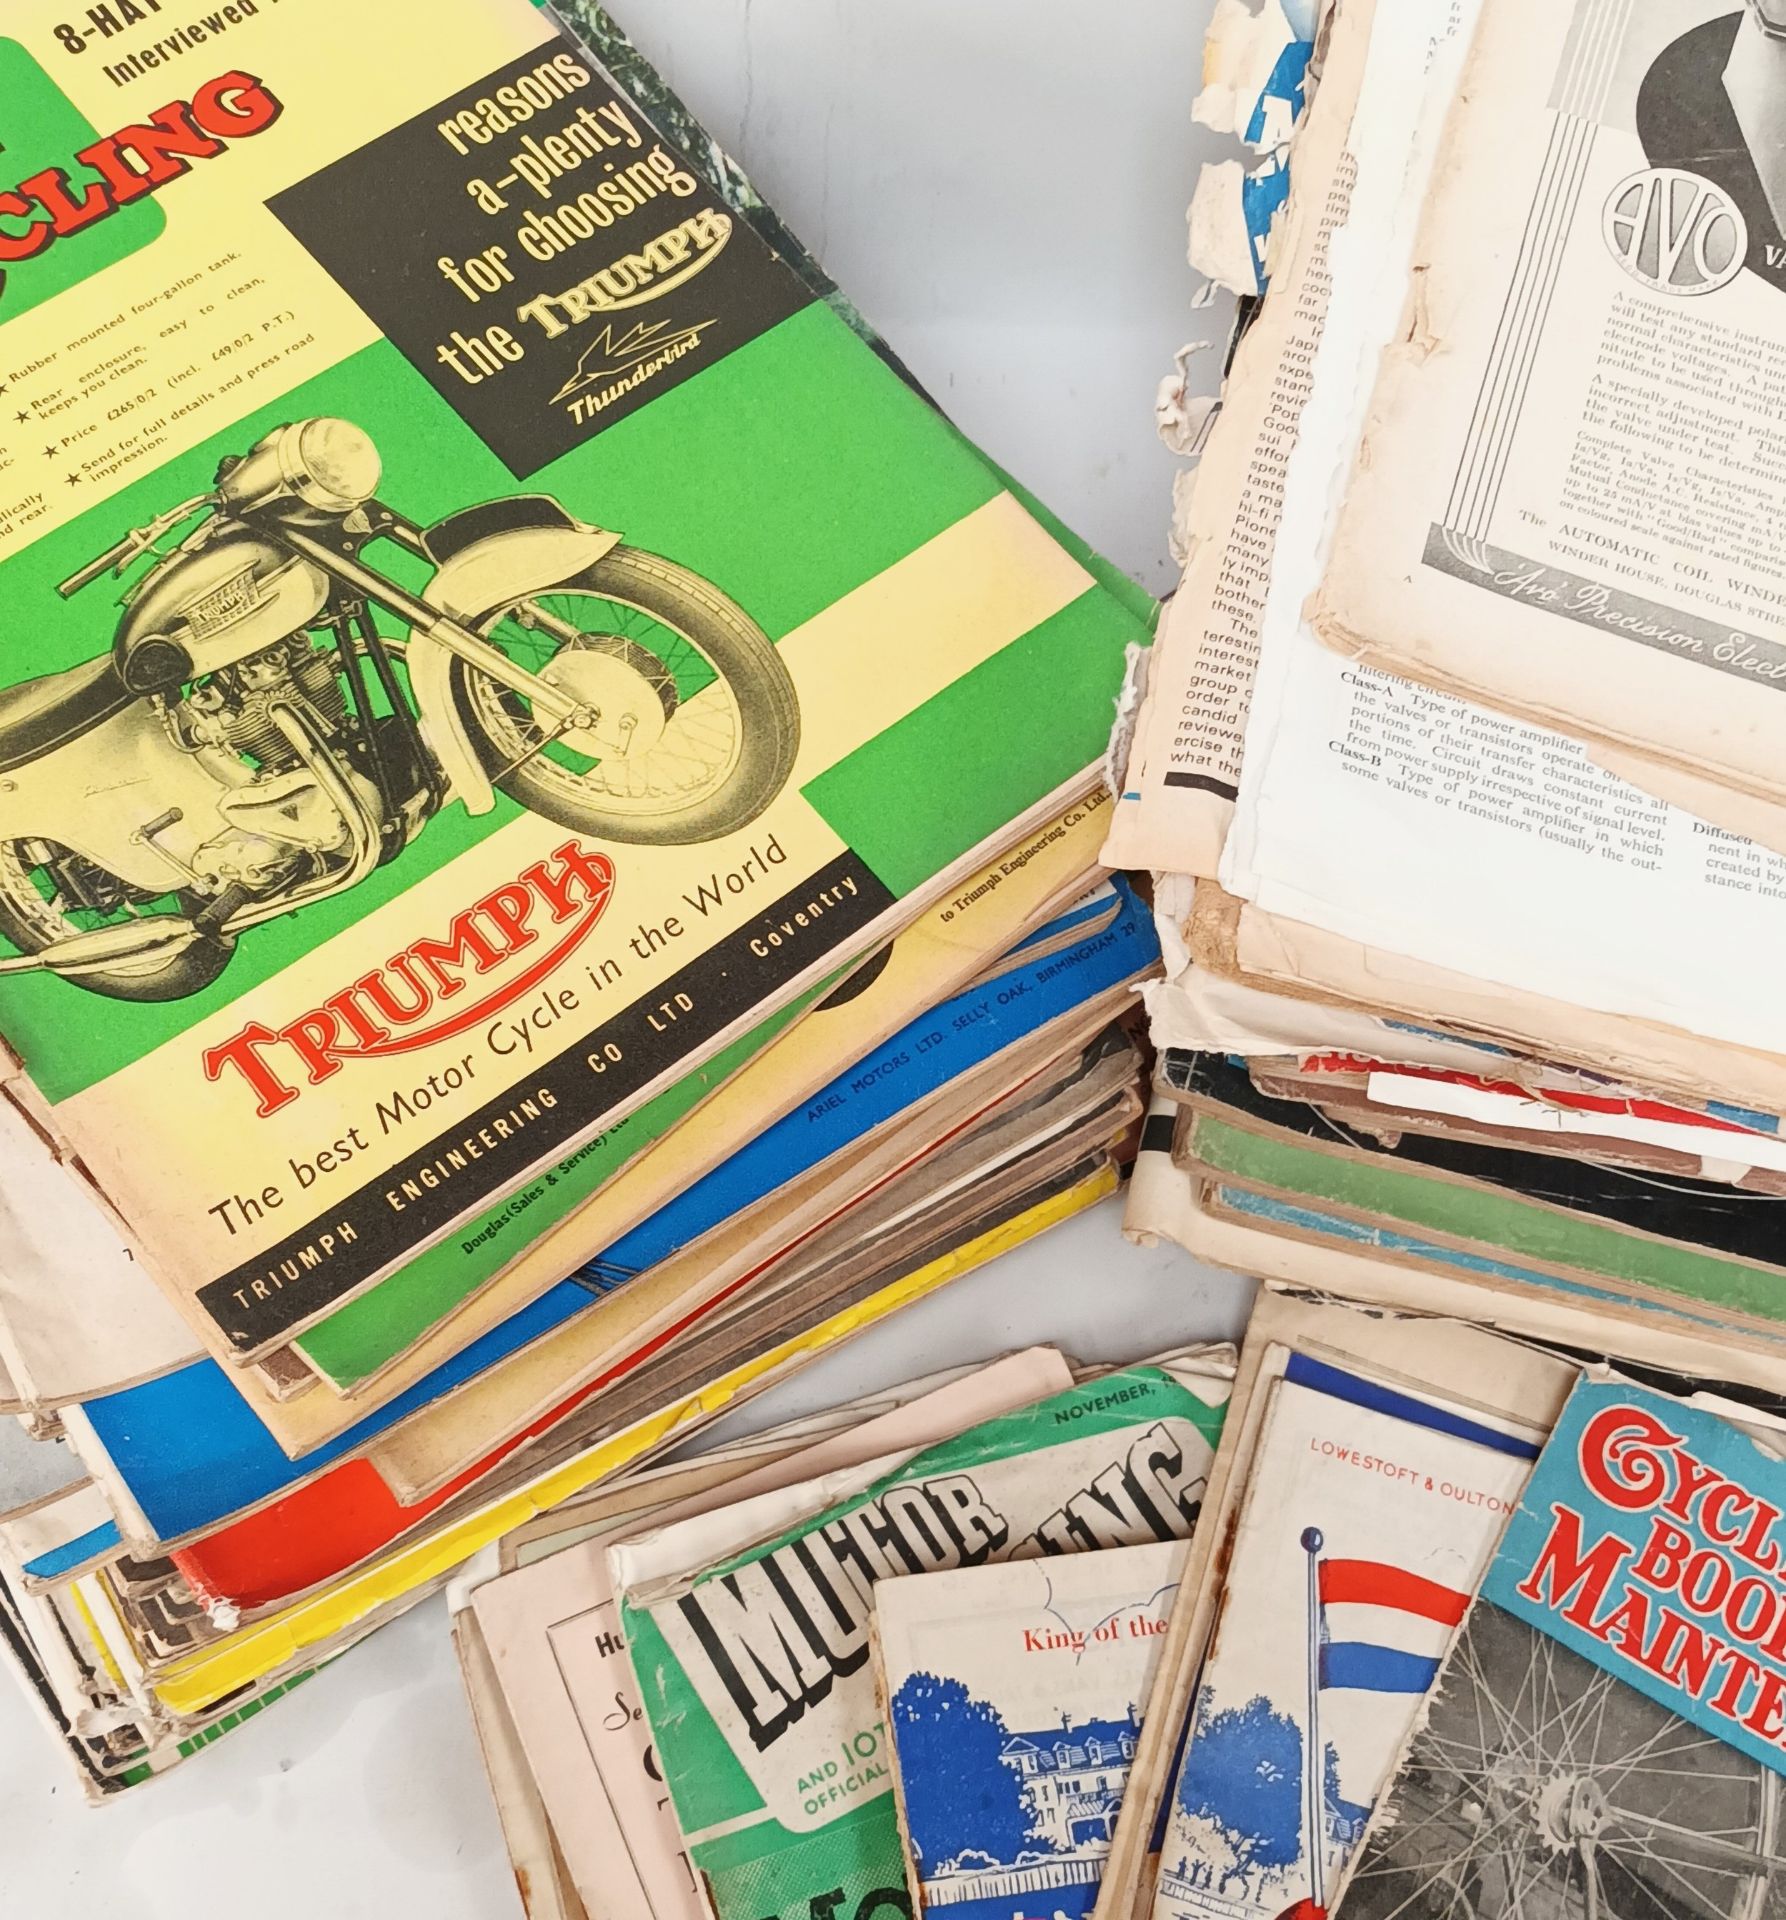 A collection of Autosport, Motor Racing, The motorcycle and Wireless world, c.1950/60's - Image 2 of 2